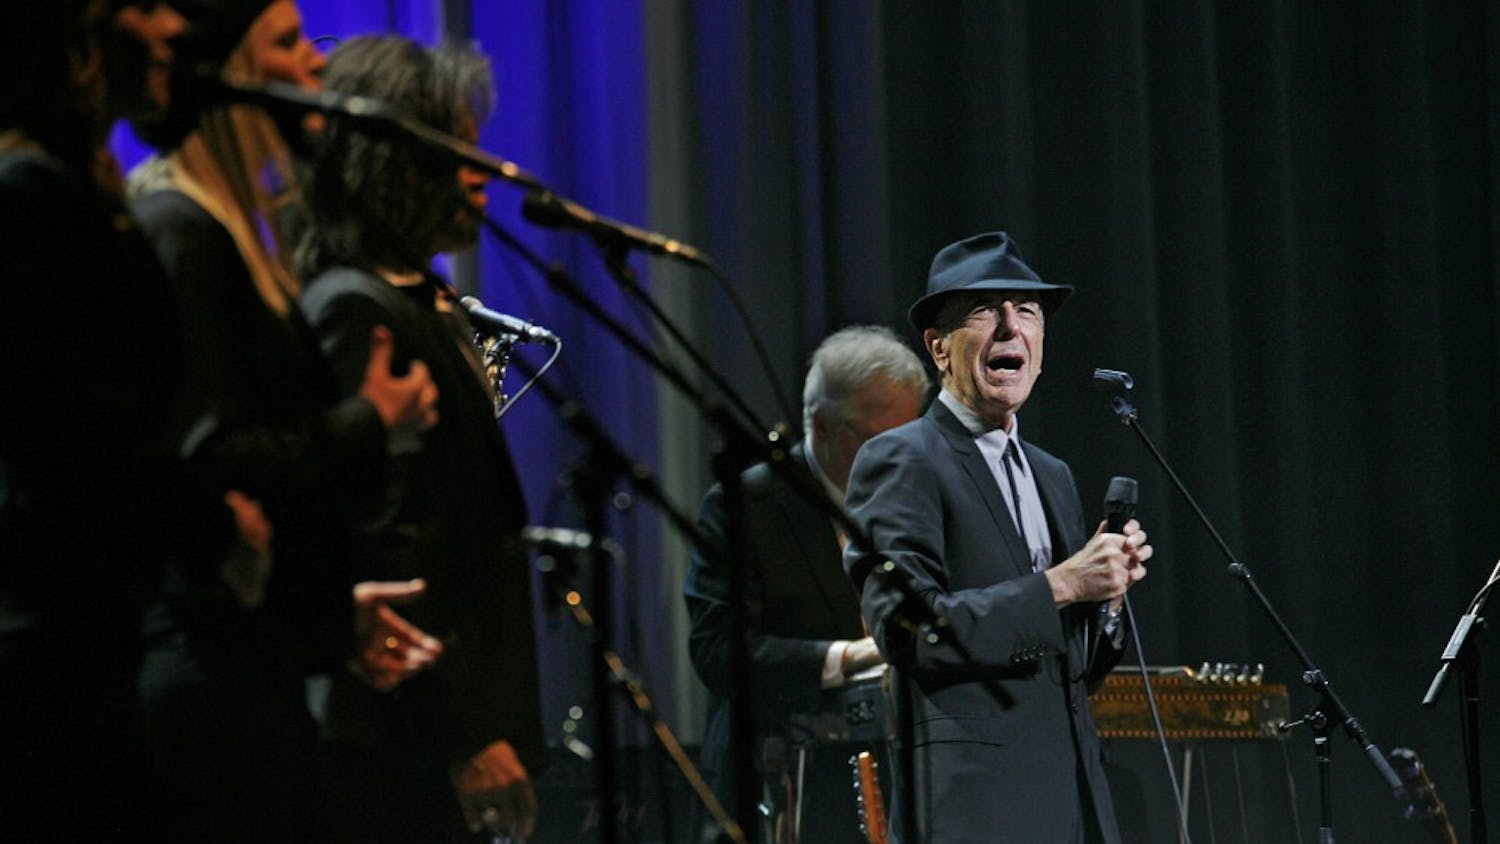 Leonard Cohen performs at the Beacon Theater in New York on February 19, 2009. Cohen, a singer-songwriter whose literary sensibility and elegant dissections of desire made him one of popular music's most influential and admired figures, died on Thursday, Nov. 10, 2016, at 82. (Carolyn Cole/Los Angeles Times/TNS)